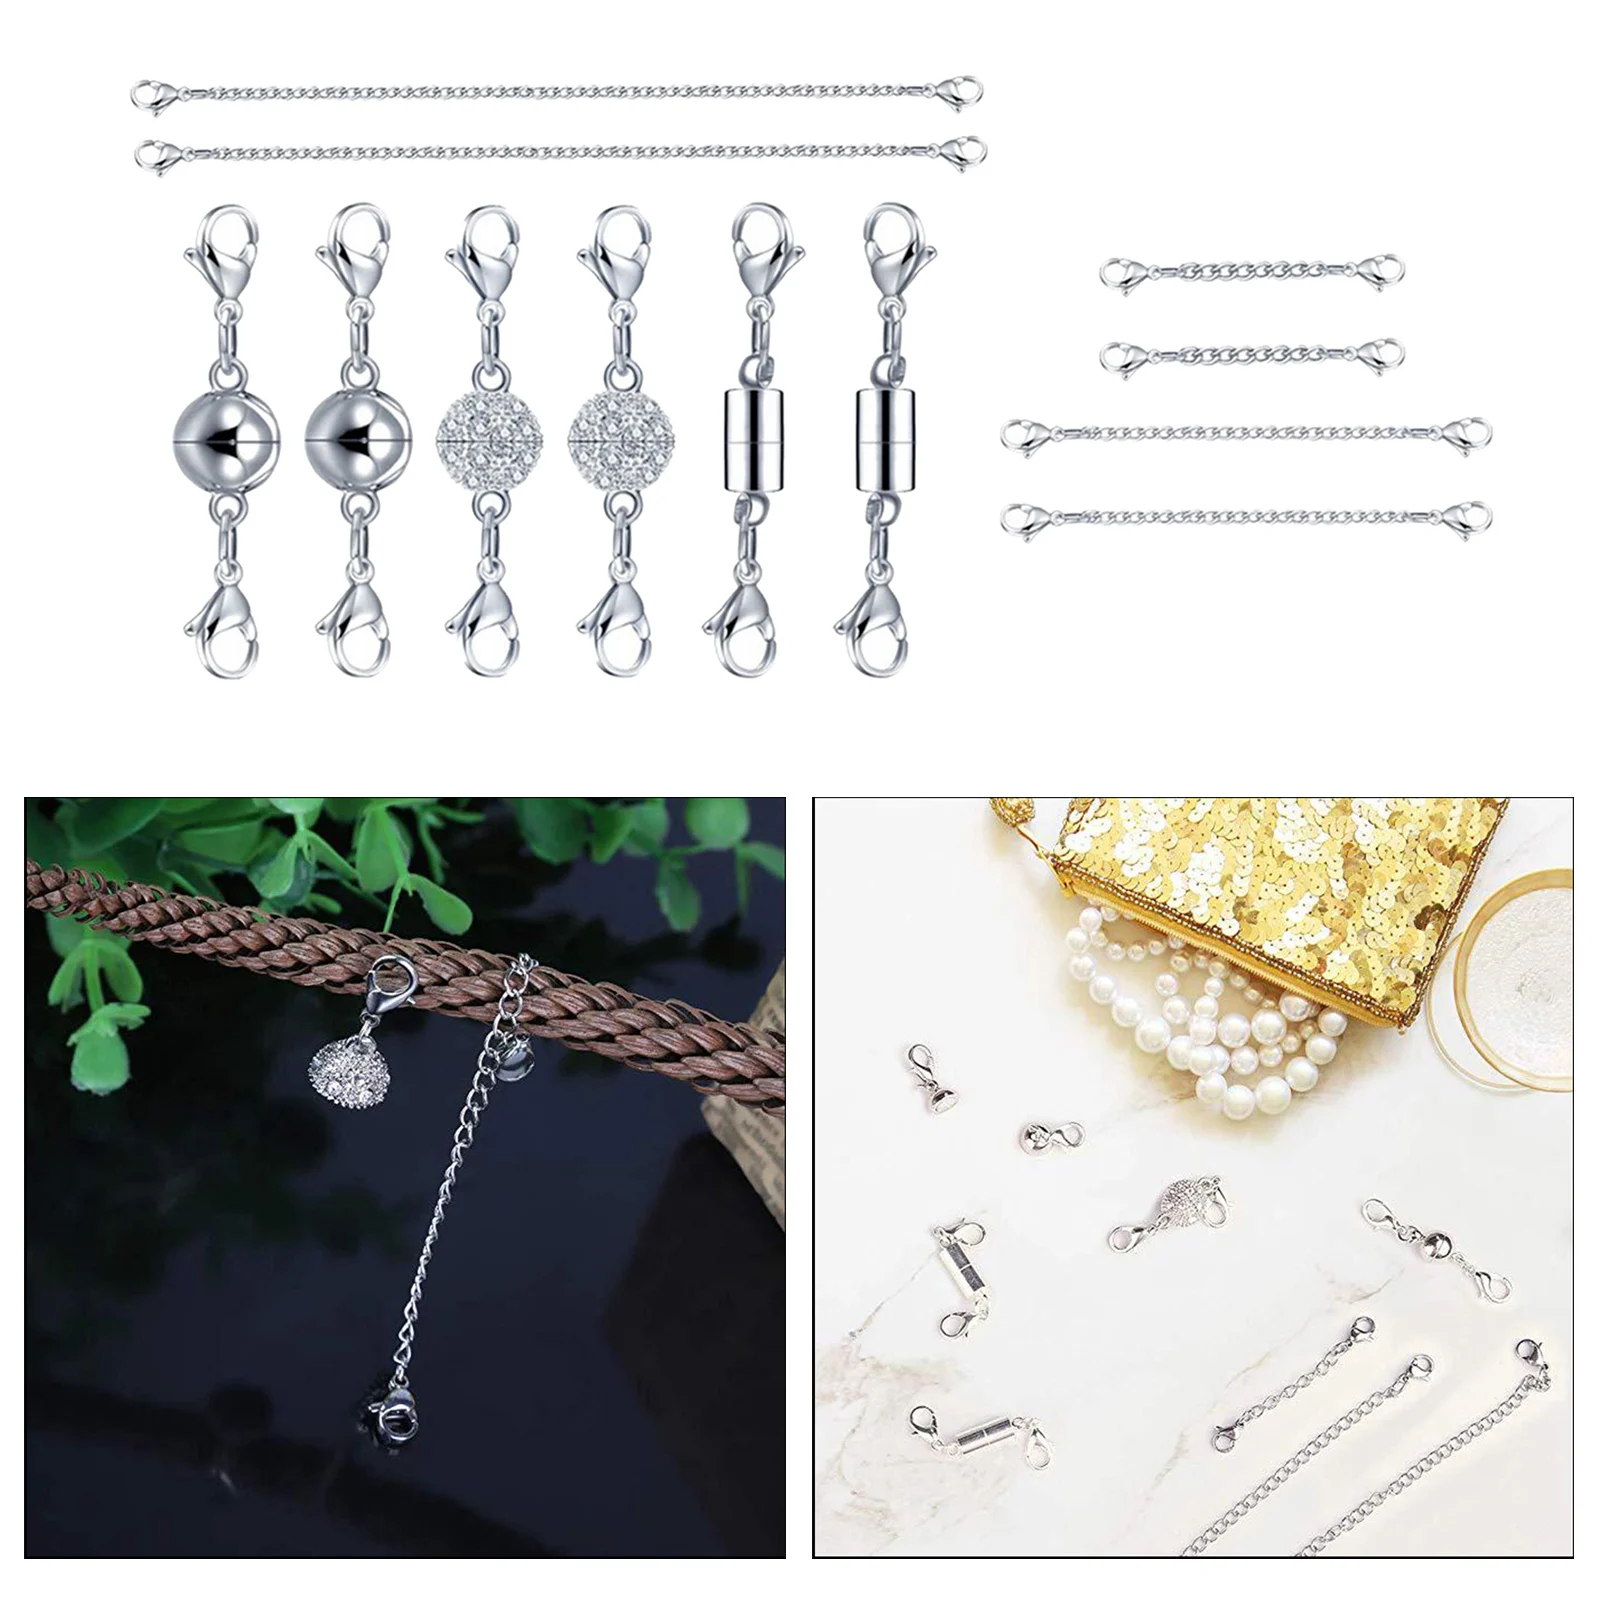 12x Necklace Magnetic Clasp Chain Extenders Connector Jewelry Lock Converter